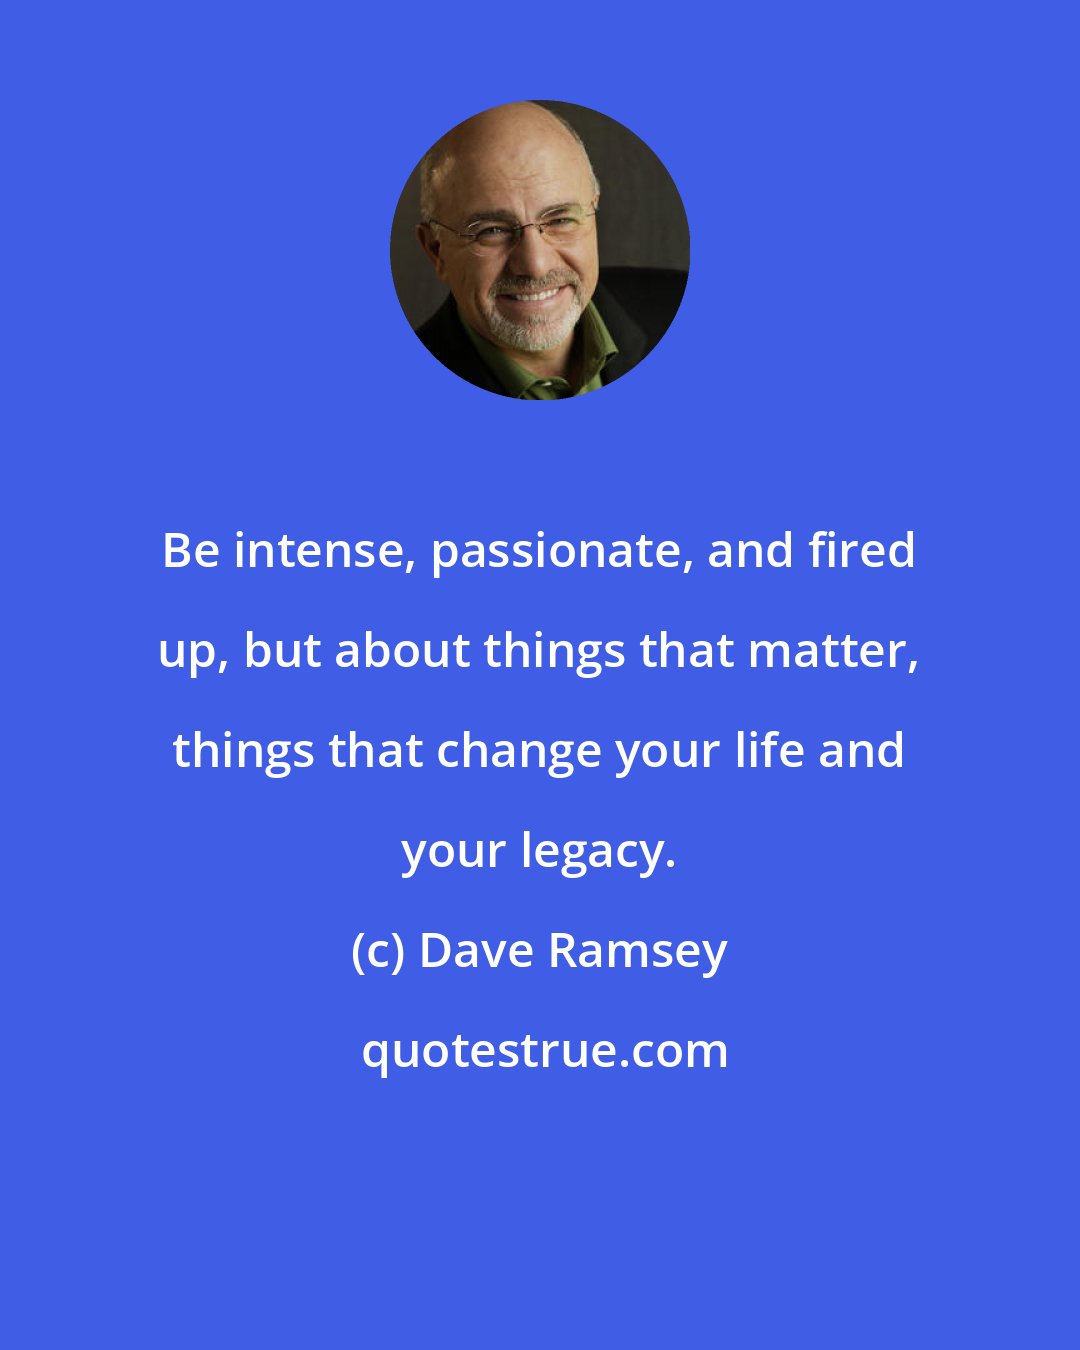 Dave Ramsey: Be intense, passionate, and fired up, but about things that matter, things that change your life and your legacy.